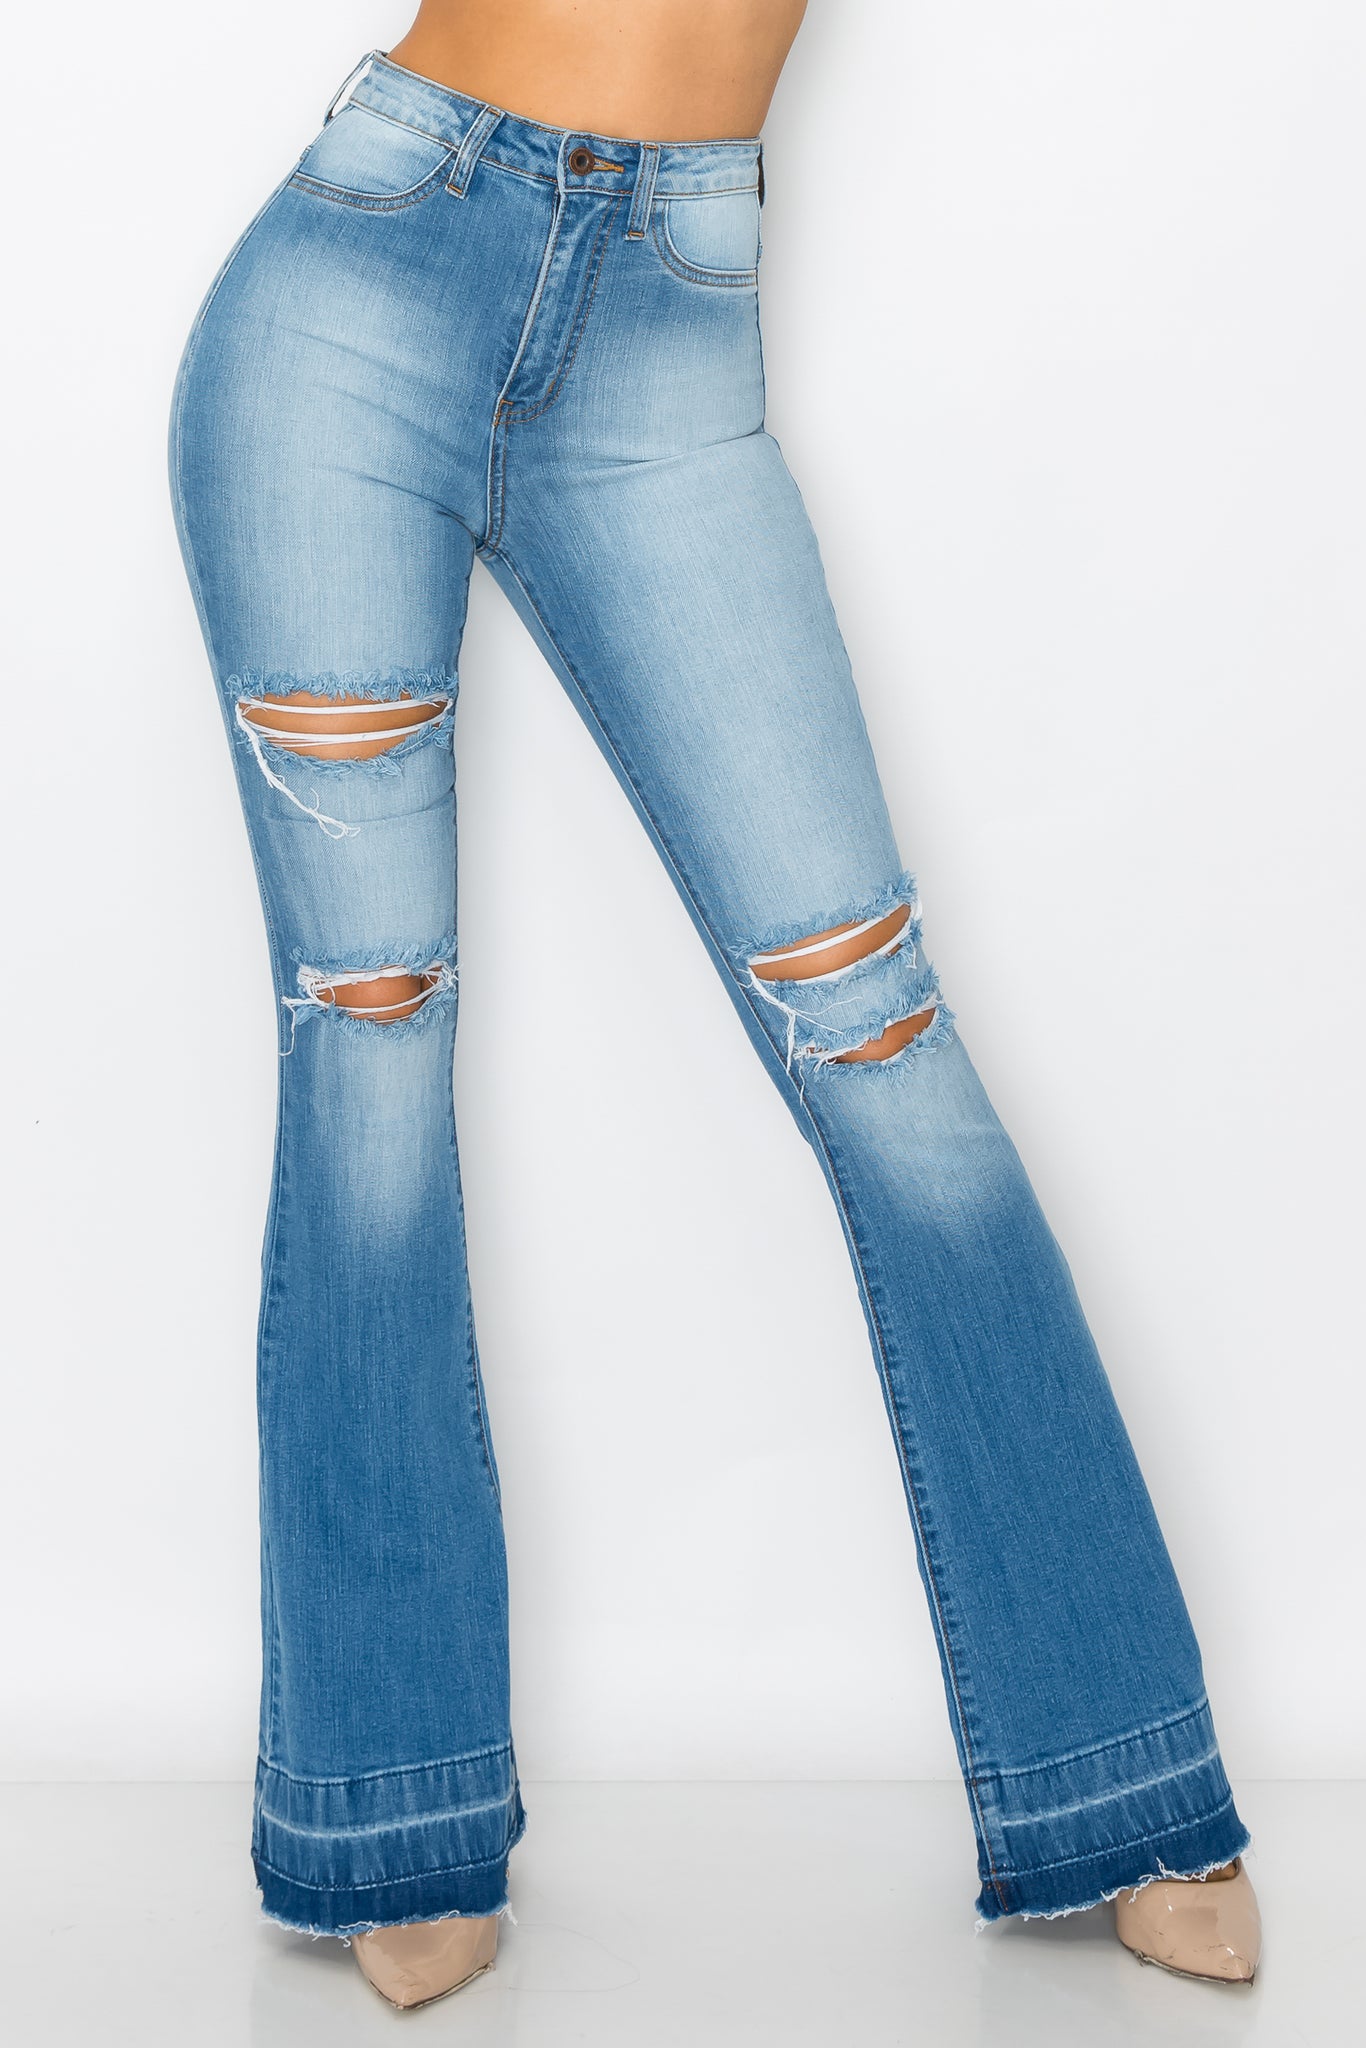 2143 Woman High Rise Light Flare Jeans W/Knee & Tight Slices – Aphrodite  Jeans